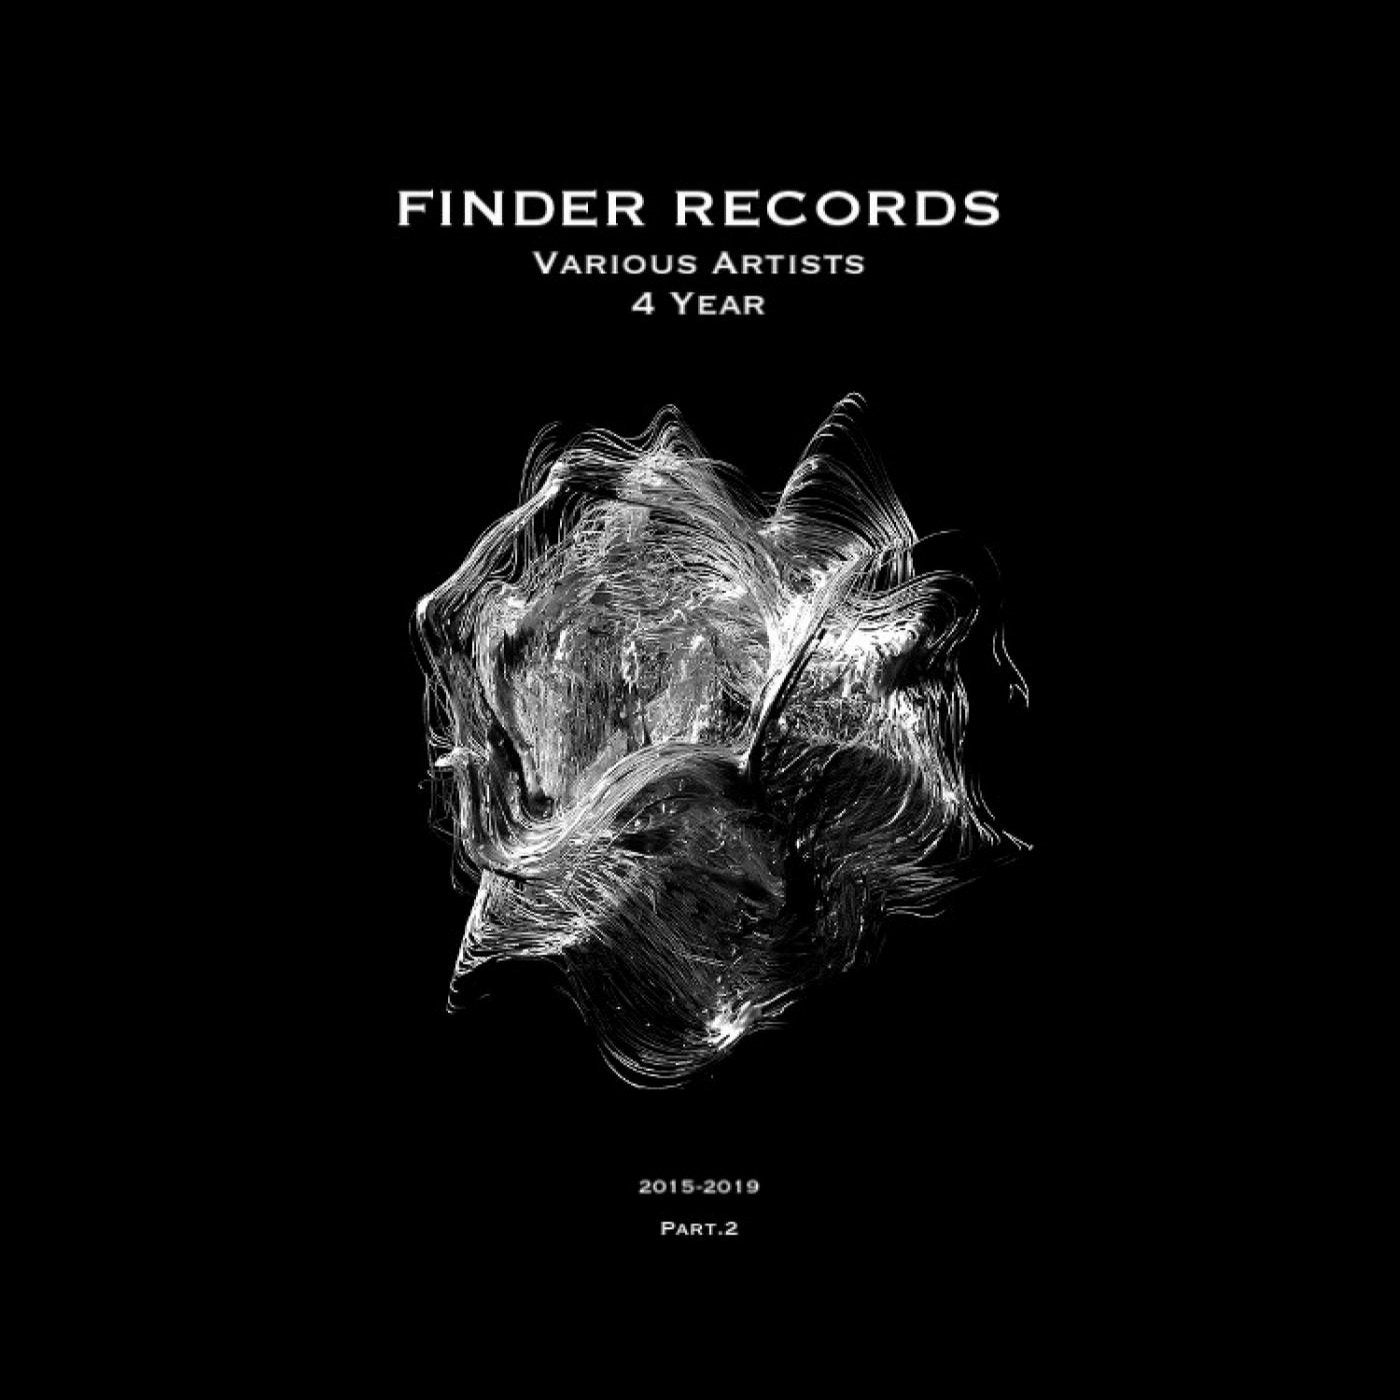 Finder Records 4 Year part.2